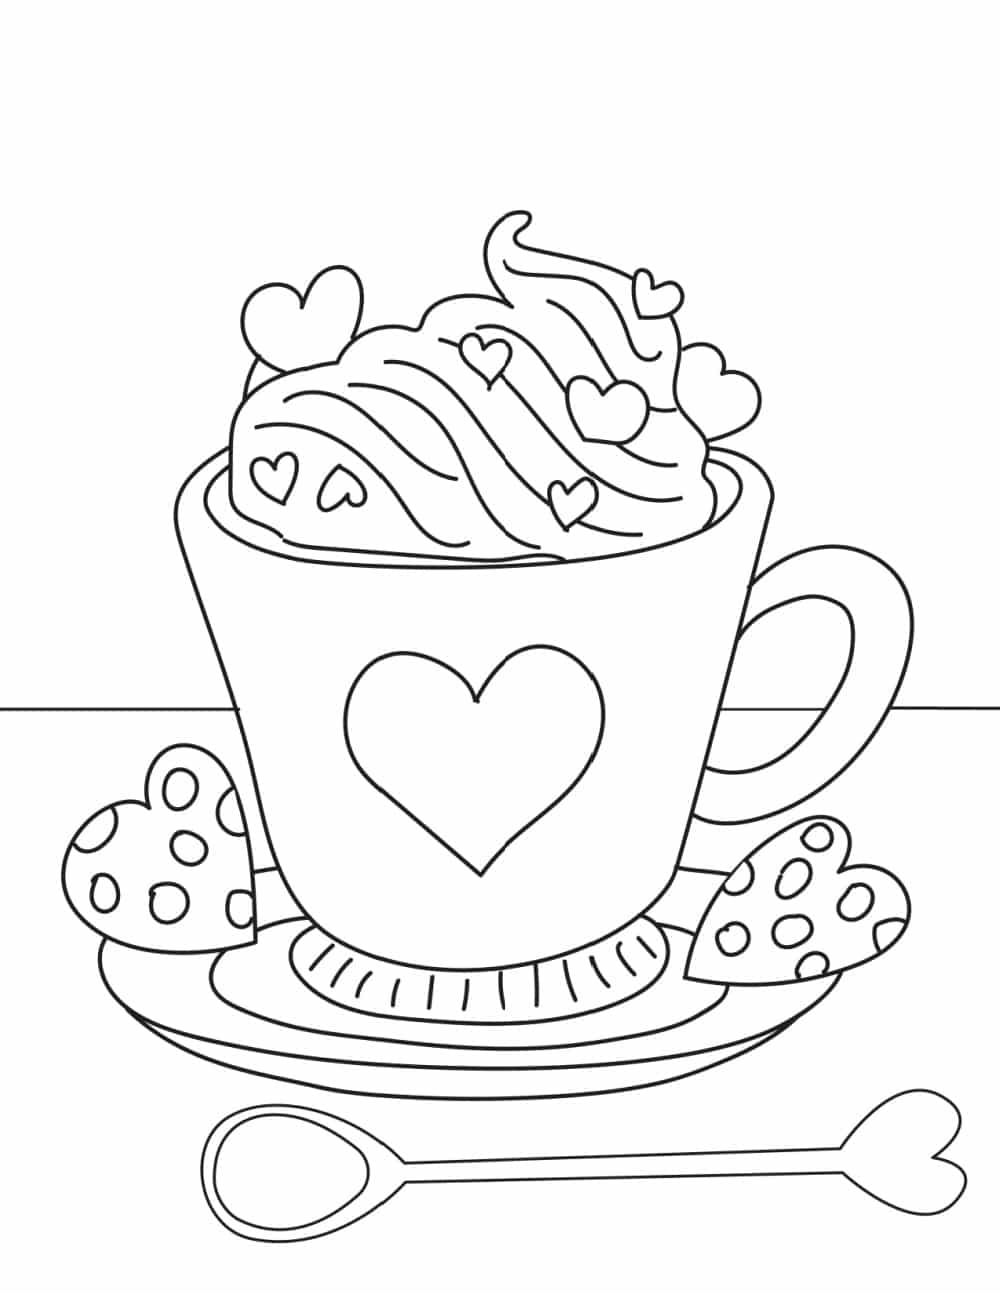 Free printable valentines day coloring pages